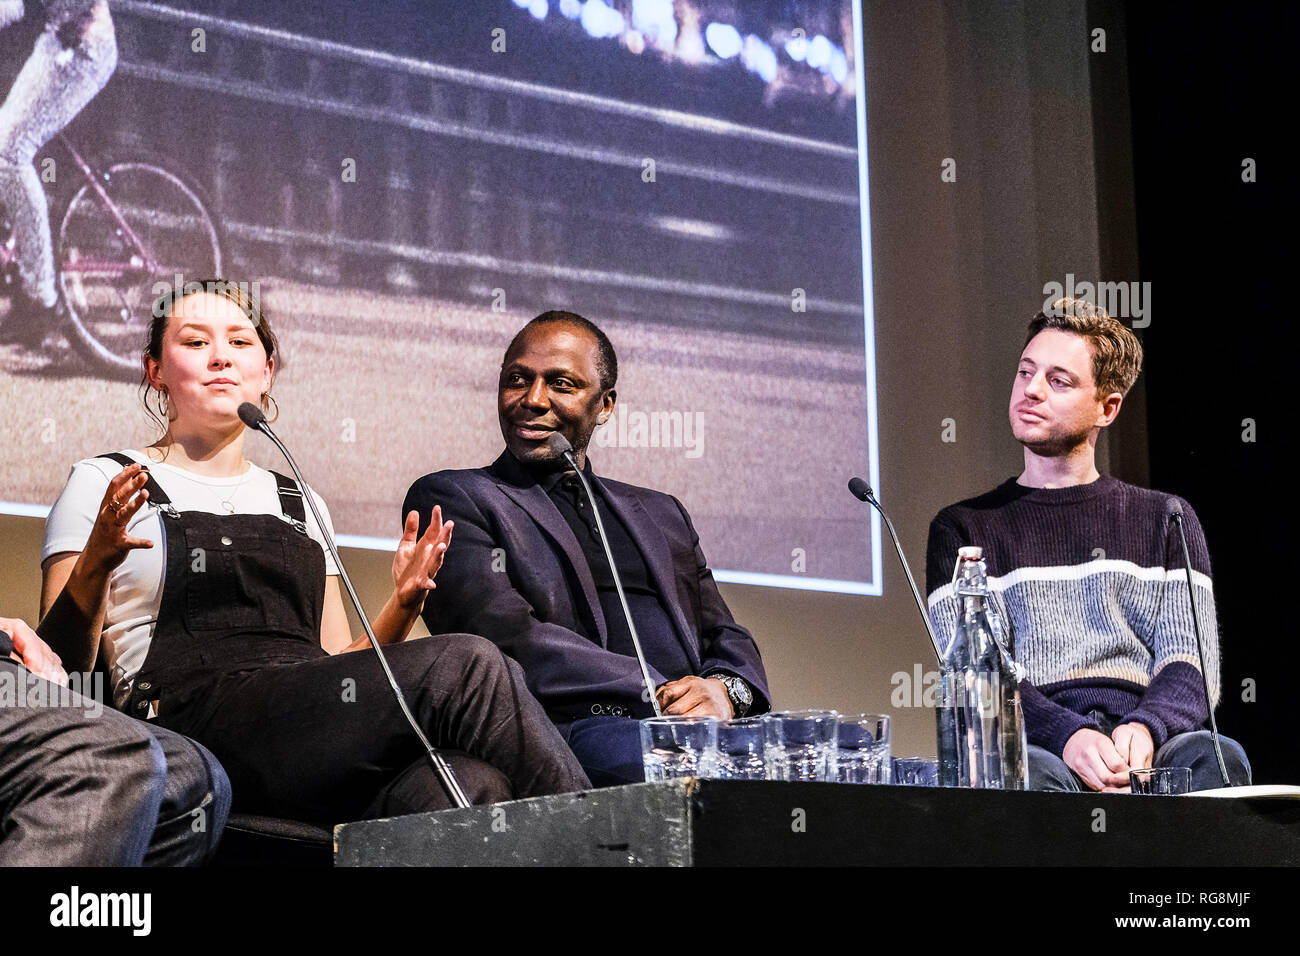 London, UK. 28th Jan, 2019. Mark Kermode, Liv Hill, Cyril Nri and James Gardner on stage at Mark Kermode Live in 3D on Monday 28 January 2019 at BFI Southbank, London. Liv Hill, Cyril Nri and James Gardner talked about their upcoming film Jellyfish. Picture by Credit: Julie Edwards/Alamy Live News Stock Photo